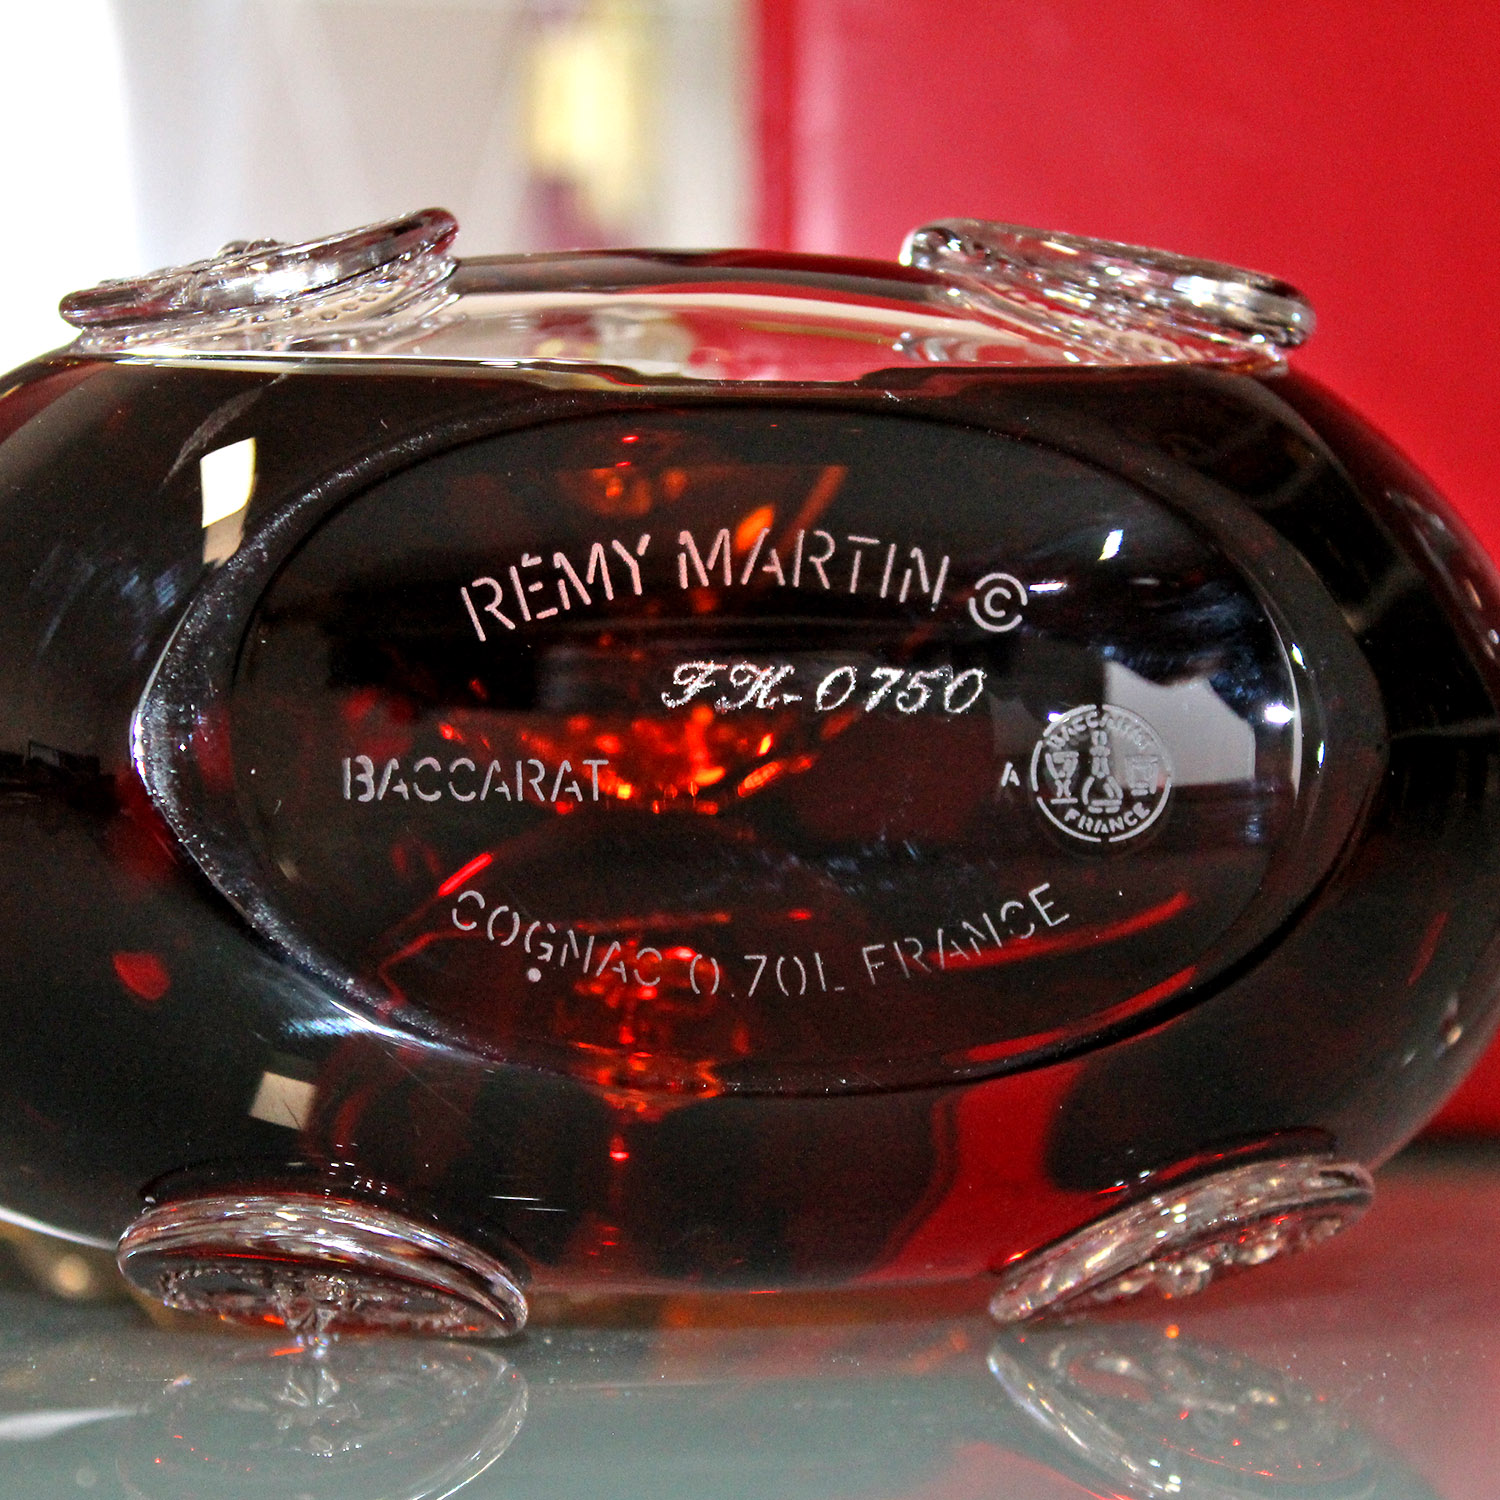 Baccarat for Remy Martin Cognac A Baccarat Remy Martin Louis 